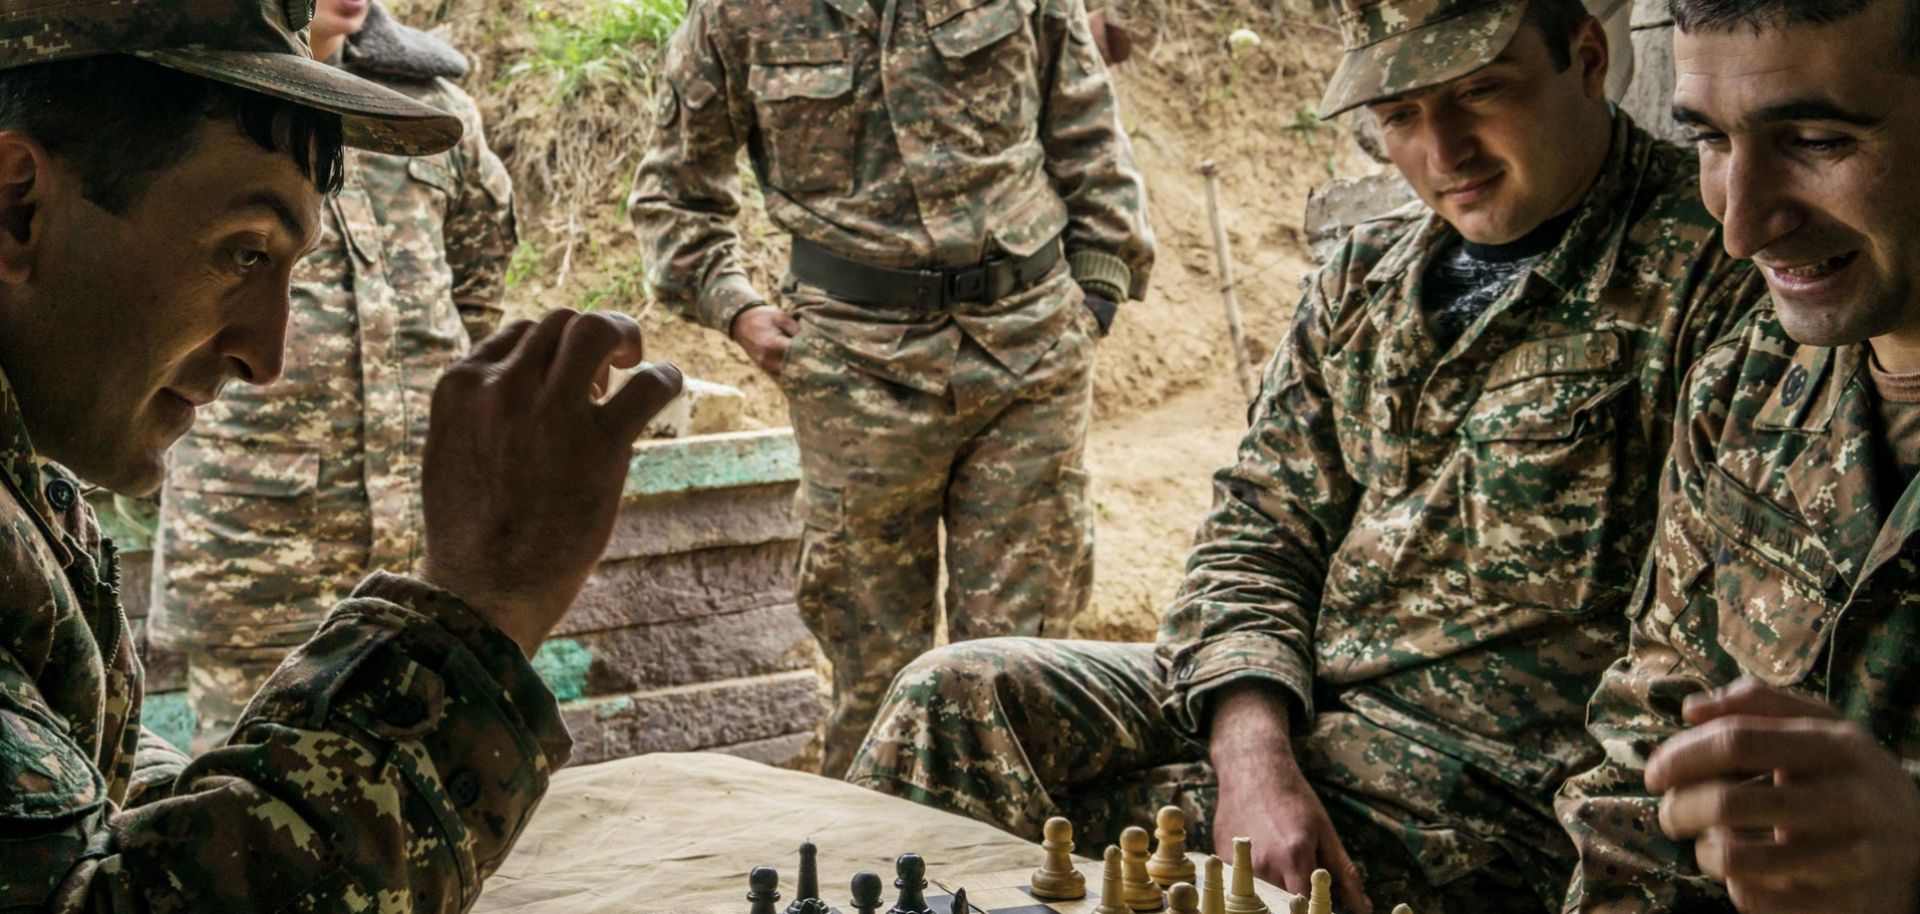 Soldiers in Nagorno-Karabakh play checkers using a chess set at their post along the line of contact with Azerbaijan on April 21.